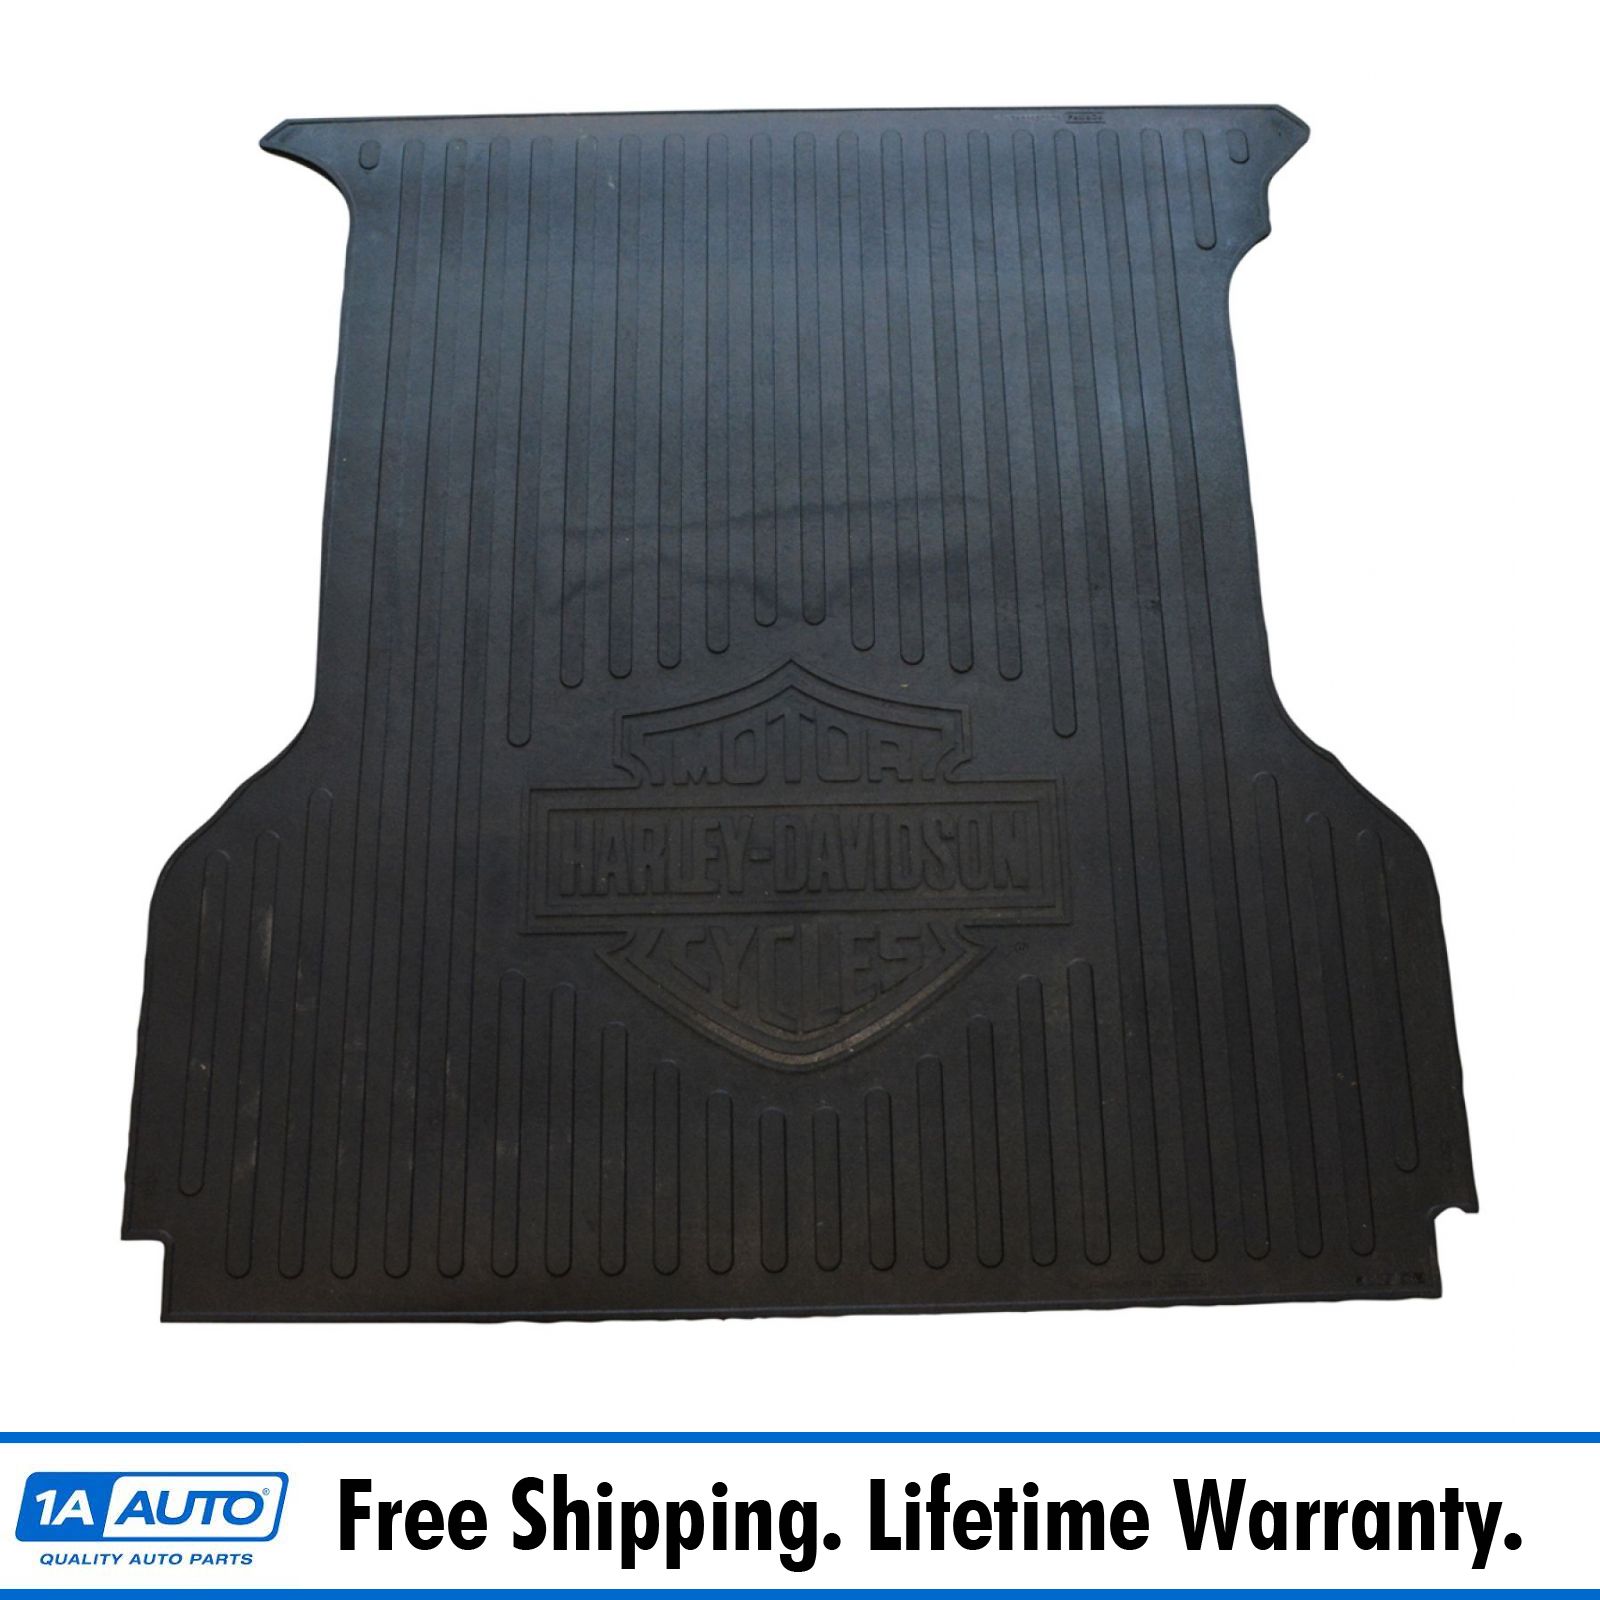 Details About Oem 7l3z99112a15a Harley Davidson Logo Heavy Duty Bed Mat For F150 55ft Bed New